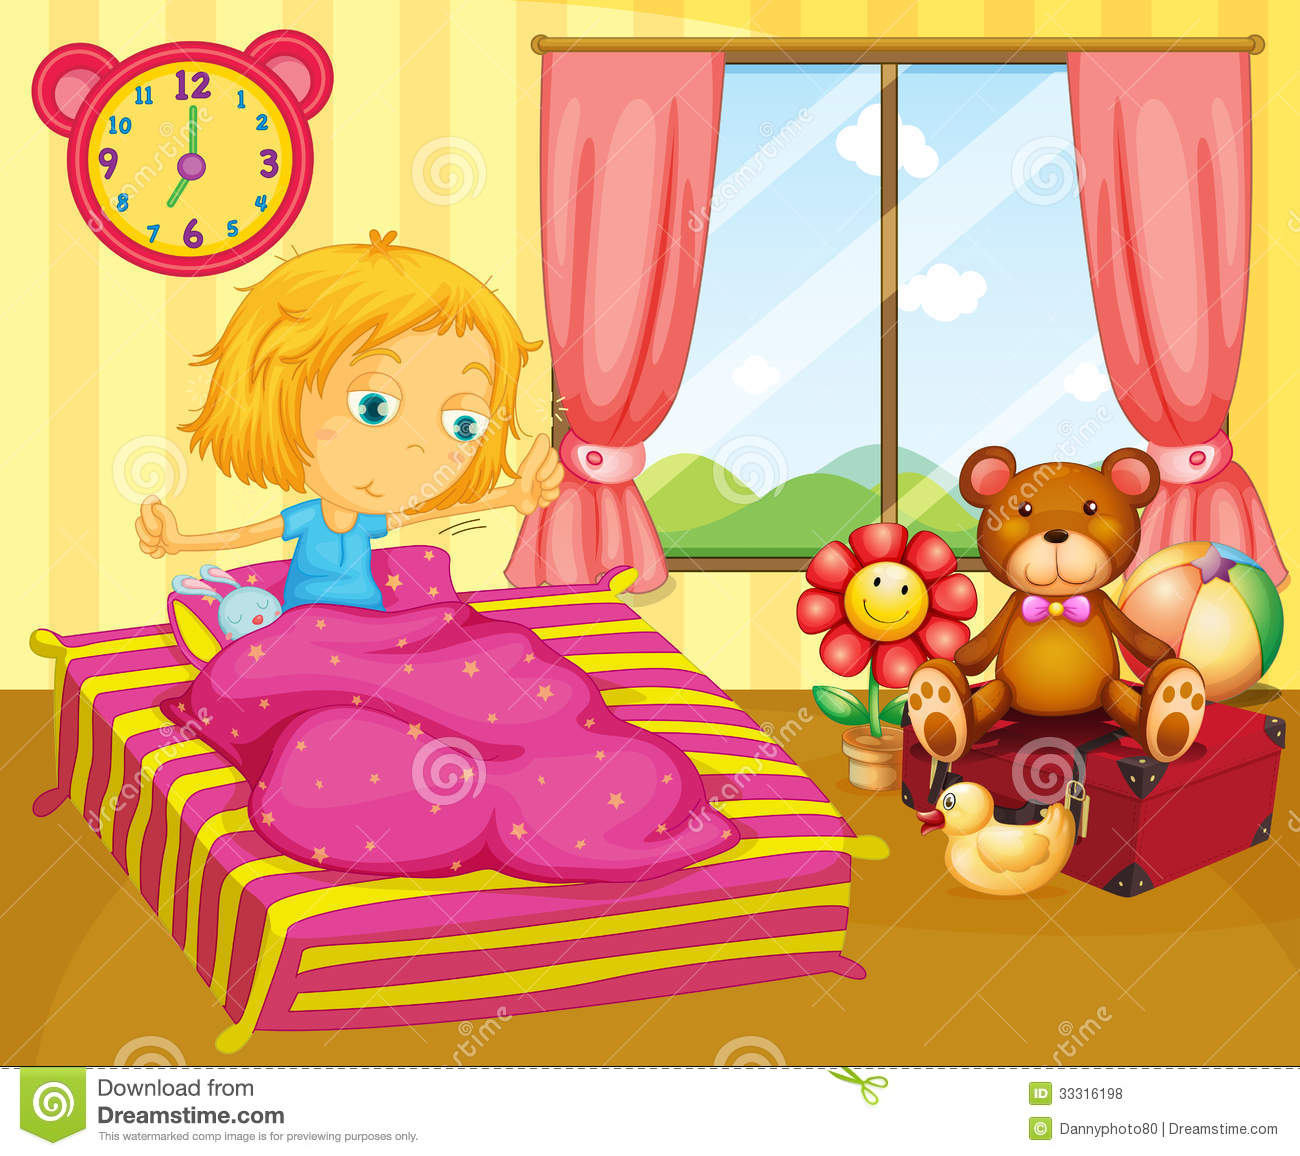 Young Girl Waking Up Royalty Free Stock Photos   Image  33316198